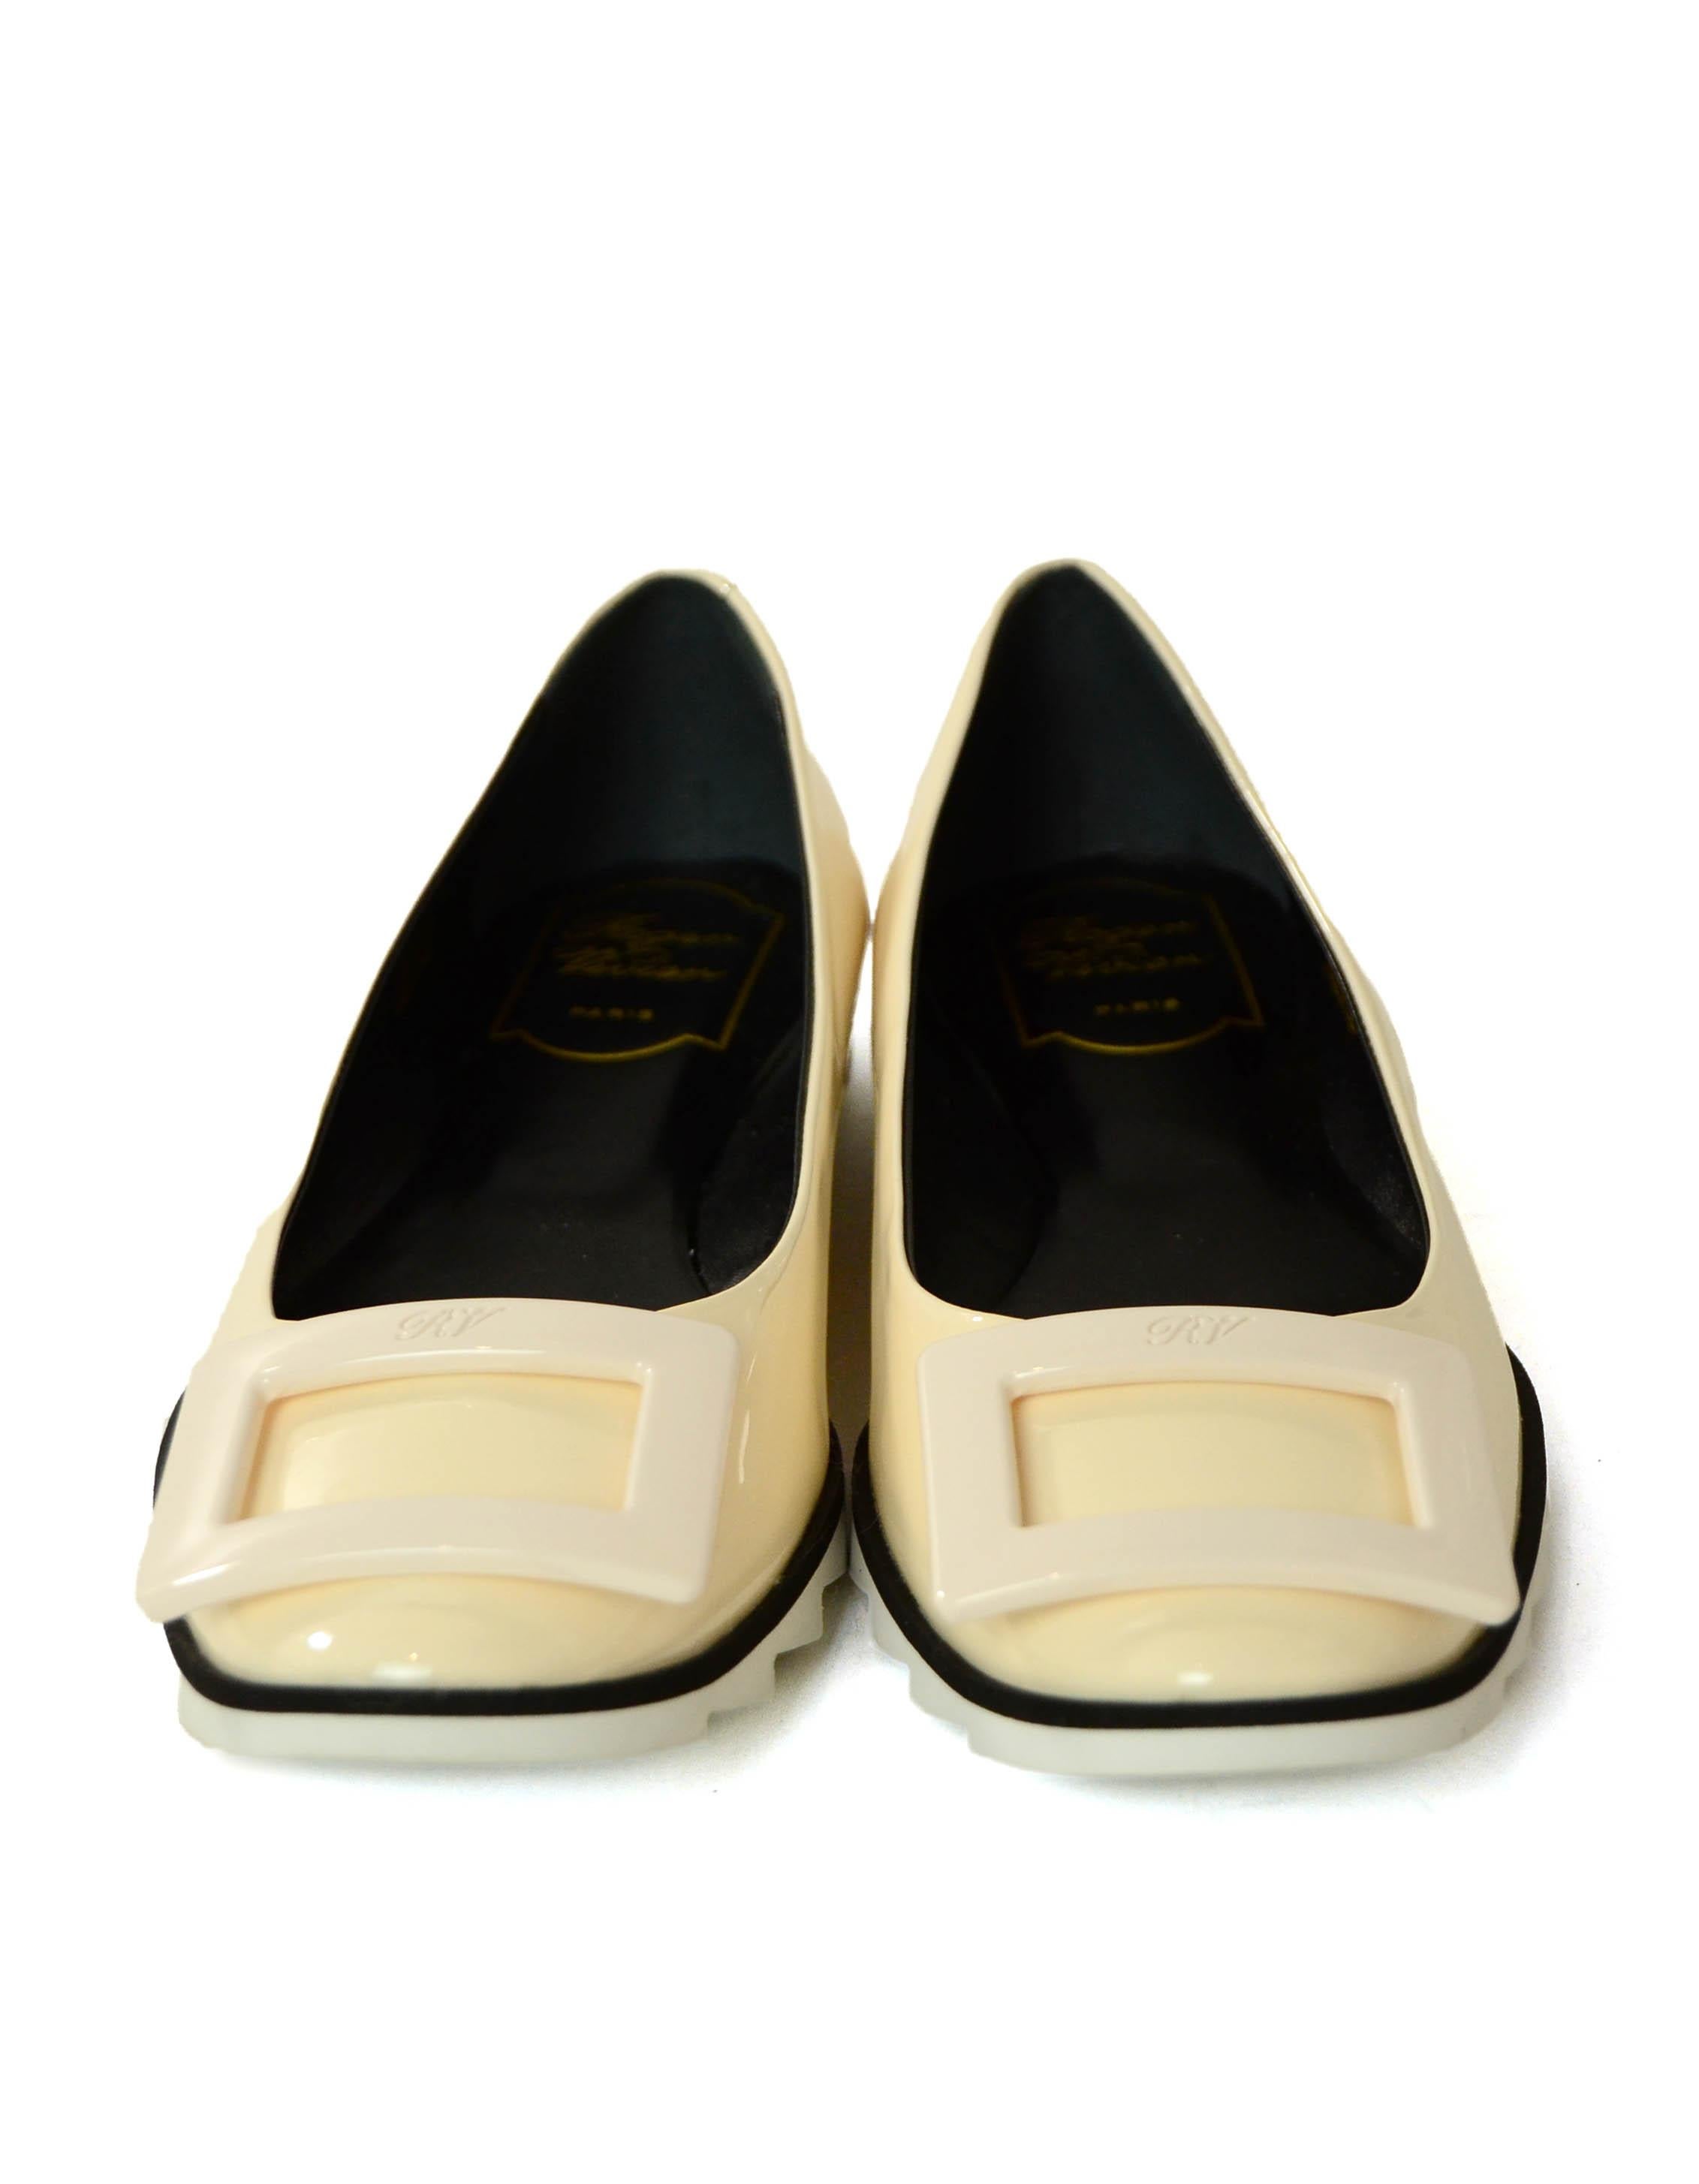 Roger Vivier Cream Patent Flats w/Buckle

Made In: Italy
Color: Cream
Hardware: Resin
Materials: Patent Leather
Closure/Opening: Slip on
Overall Condition: Excellent like new, never worn
Retail: $675

Marked Size: 37
Heel Height: .25” 